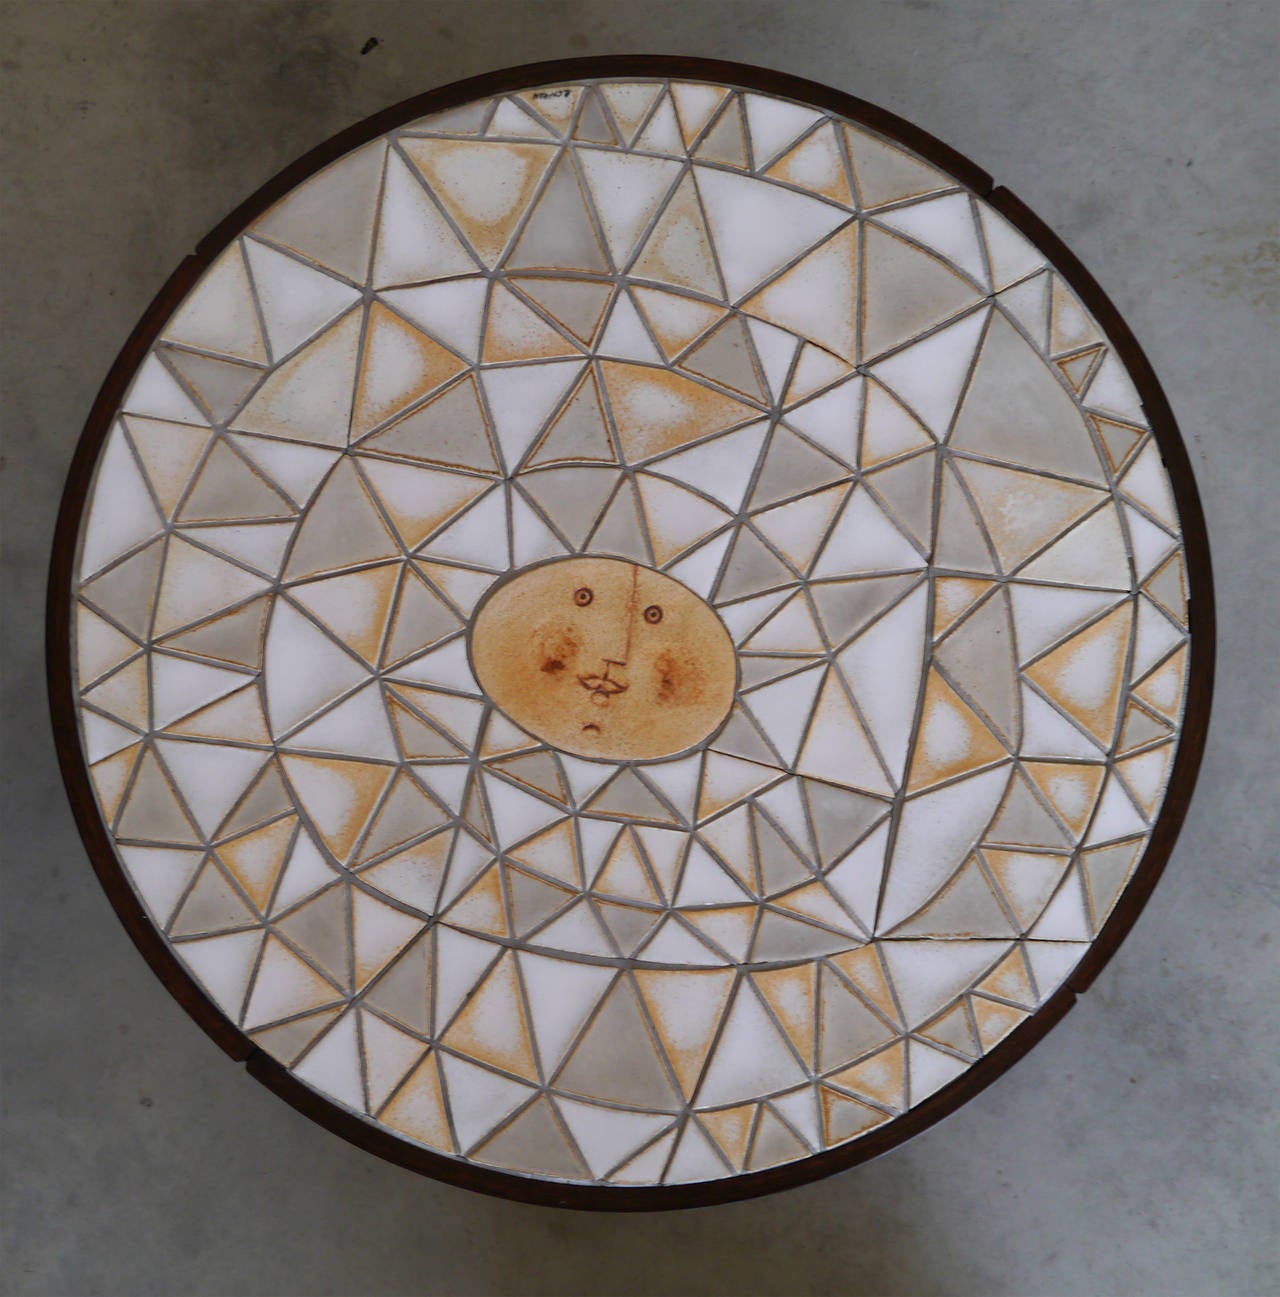 The top table consists in triangular sandstone parts forming a patchwork in various shades of matt and shiny glazes and forming a sun which is probably the most iconic subject of Capron's achievements.

It wears the Artist's signature.

We offer